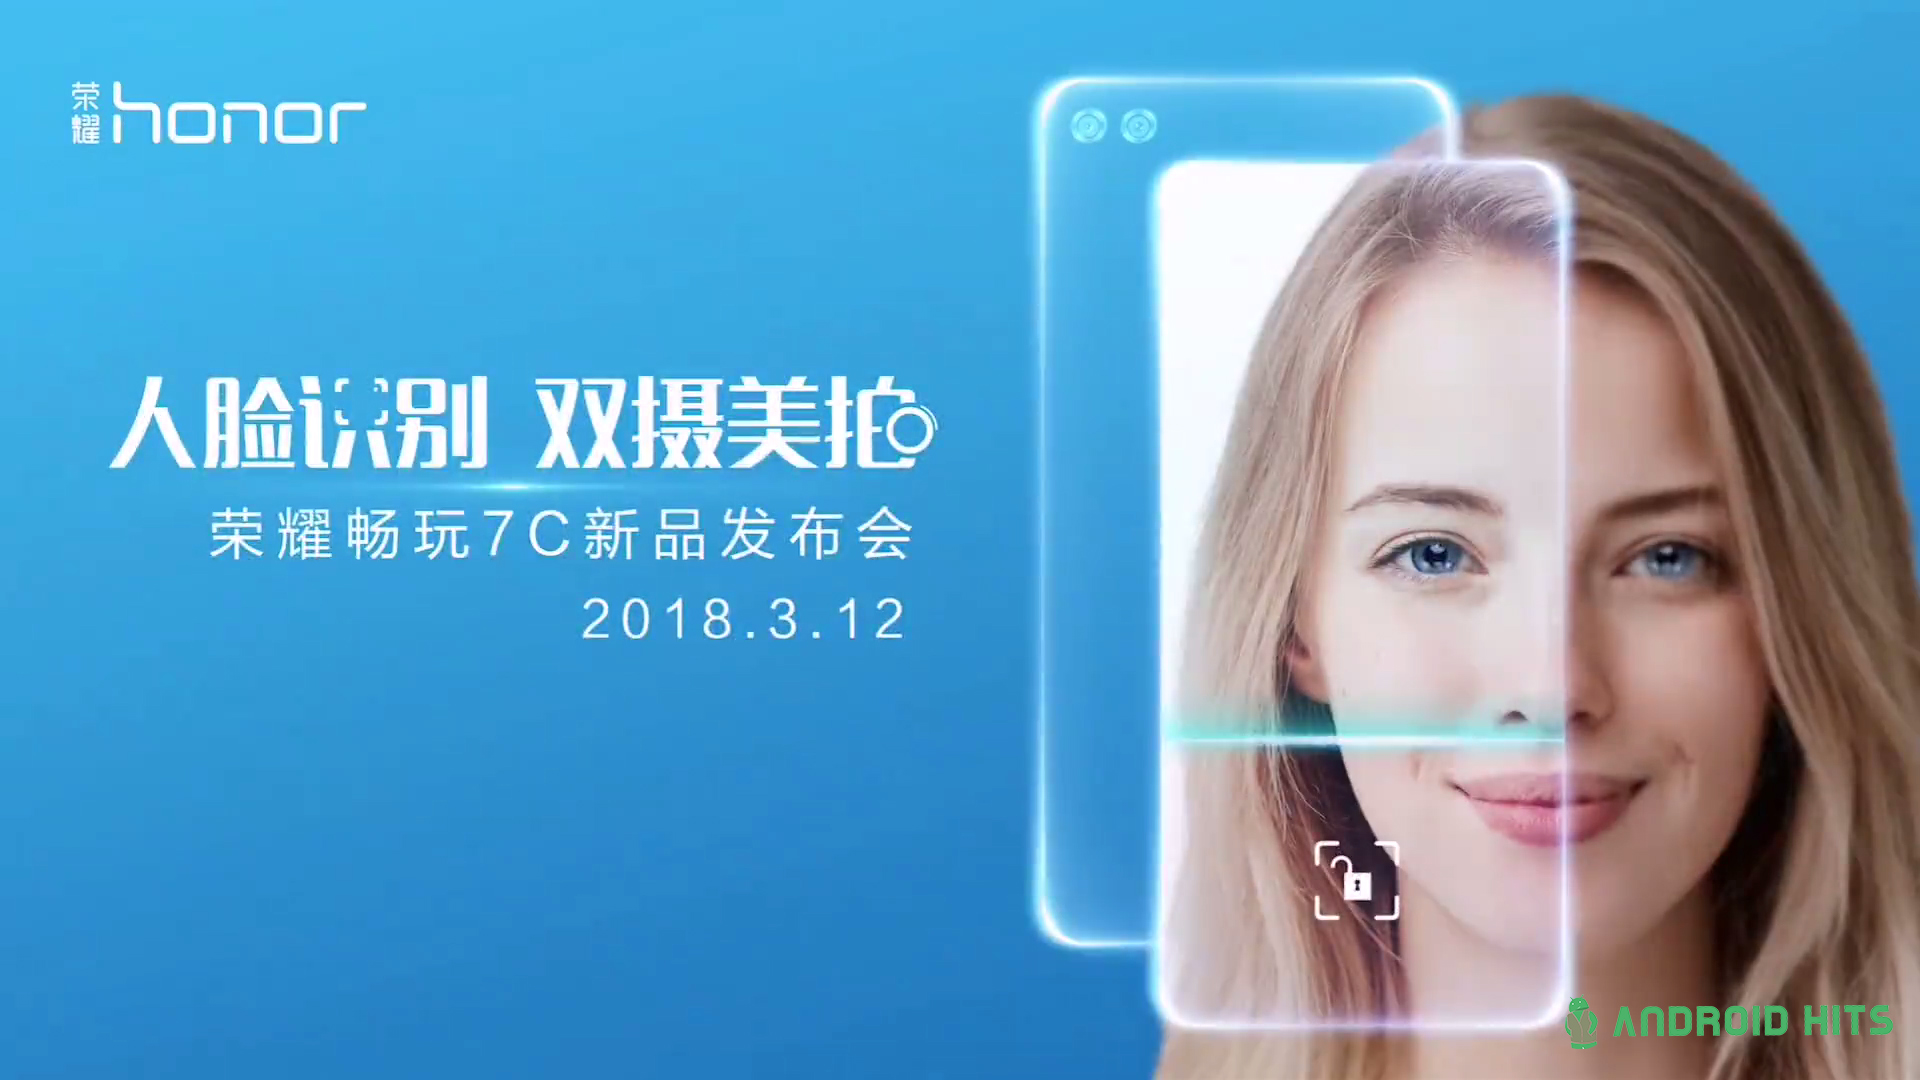 Honor 7C Ad Video leaked ahead of launch; showing dual-camera, face recognition 7